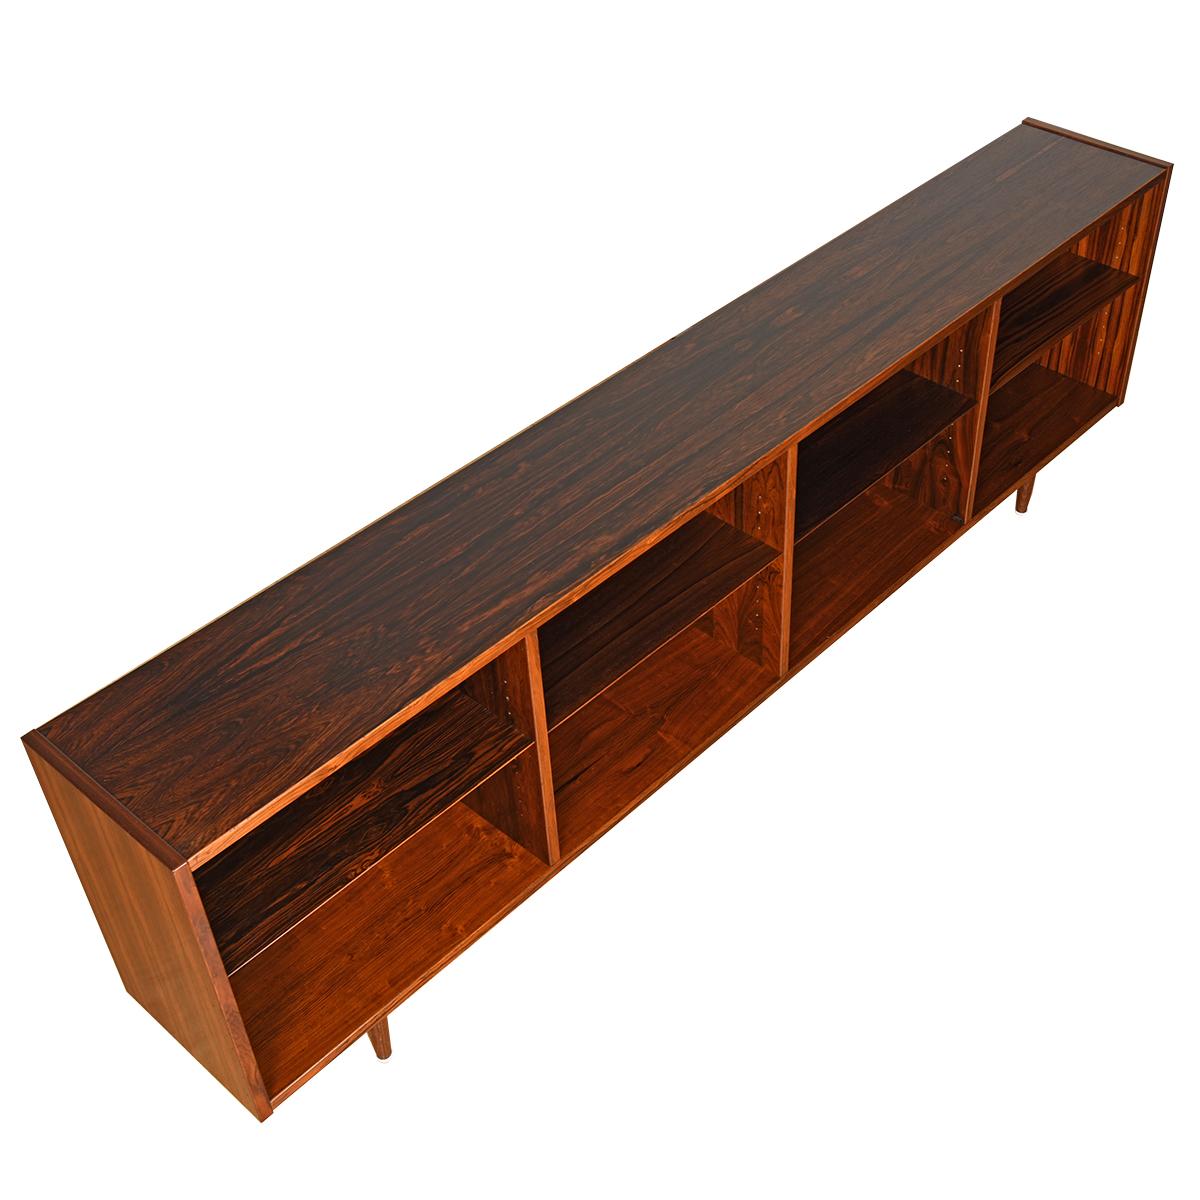 Perfect for placing under a window, we present this beautiful low and long bookcase. 4 vertical sections of equal Size with one adjustable shelf.
Edge of each shelf is beveled.

*Due to time, labor costs, and heightened restrictions on Brazilian